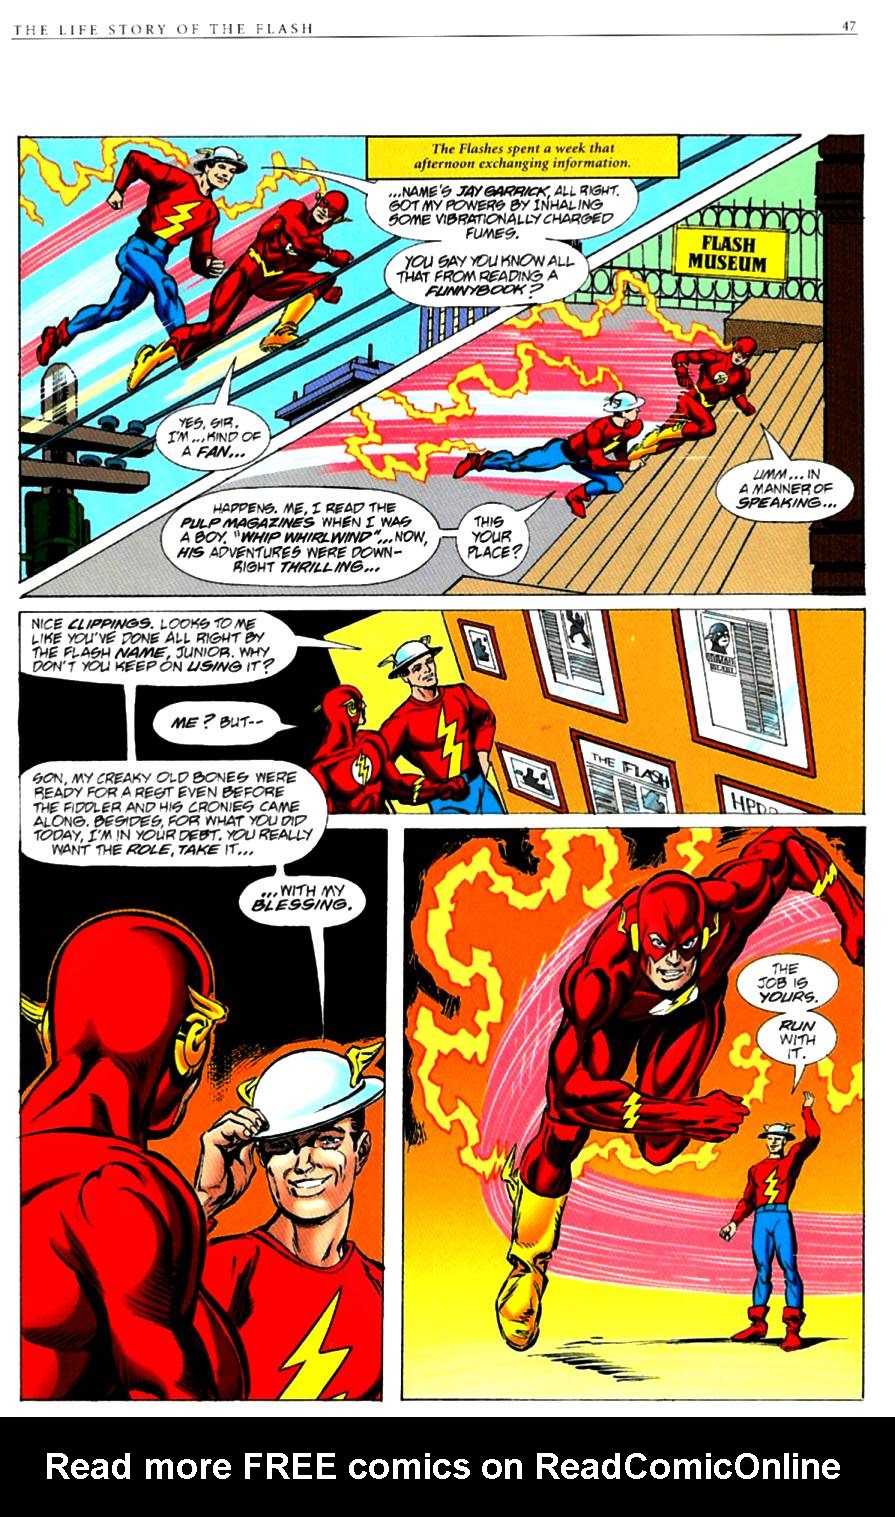 Read online The Life Story of the Flash comic -  Issue # Full - 49